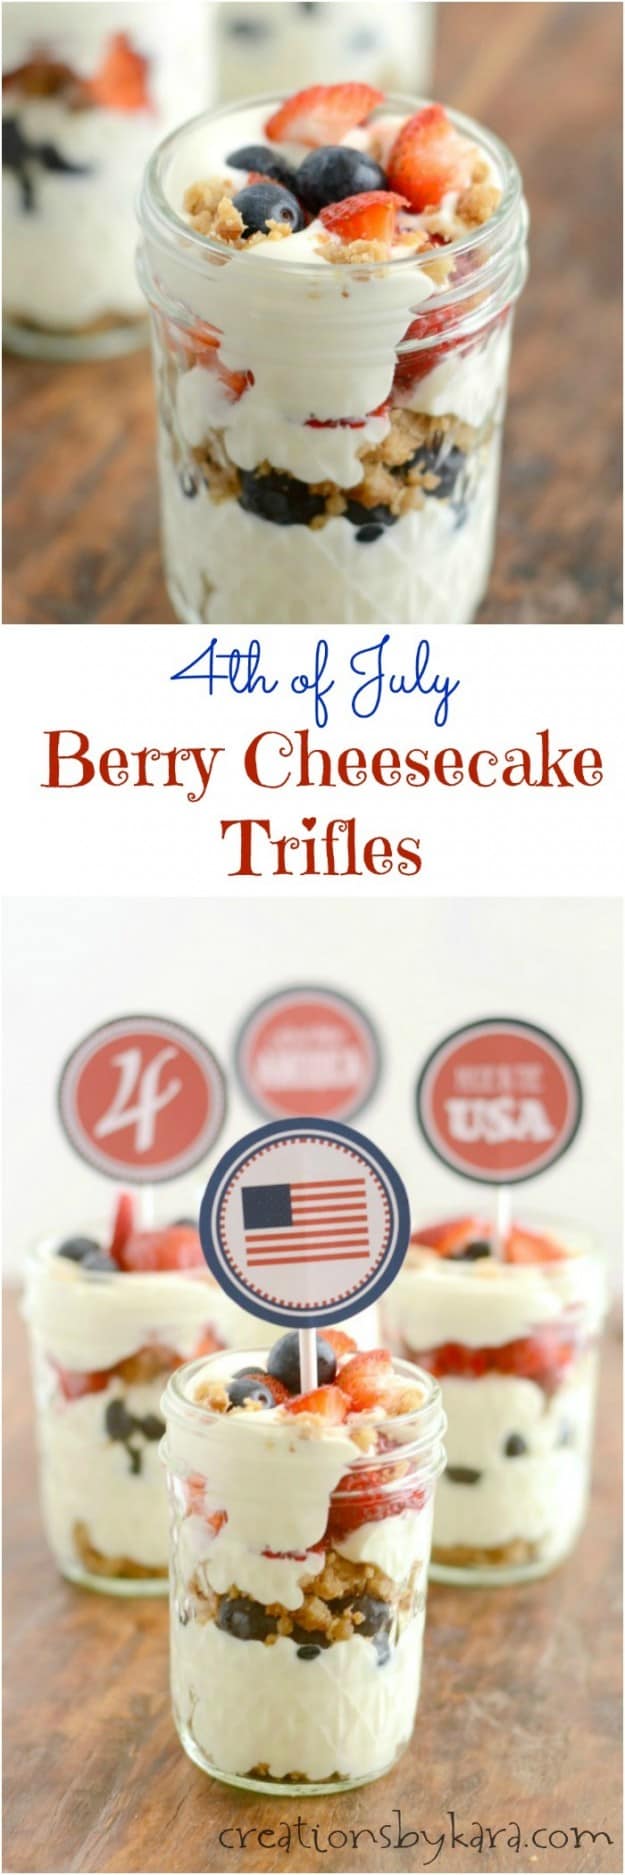 4th of July Berry Cheesecake Trifles